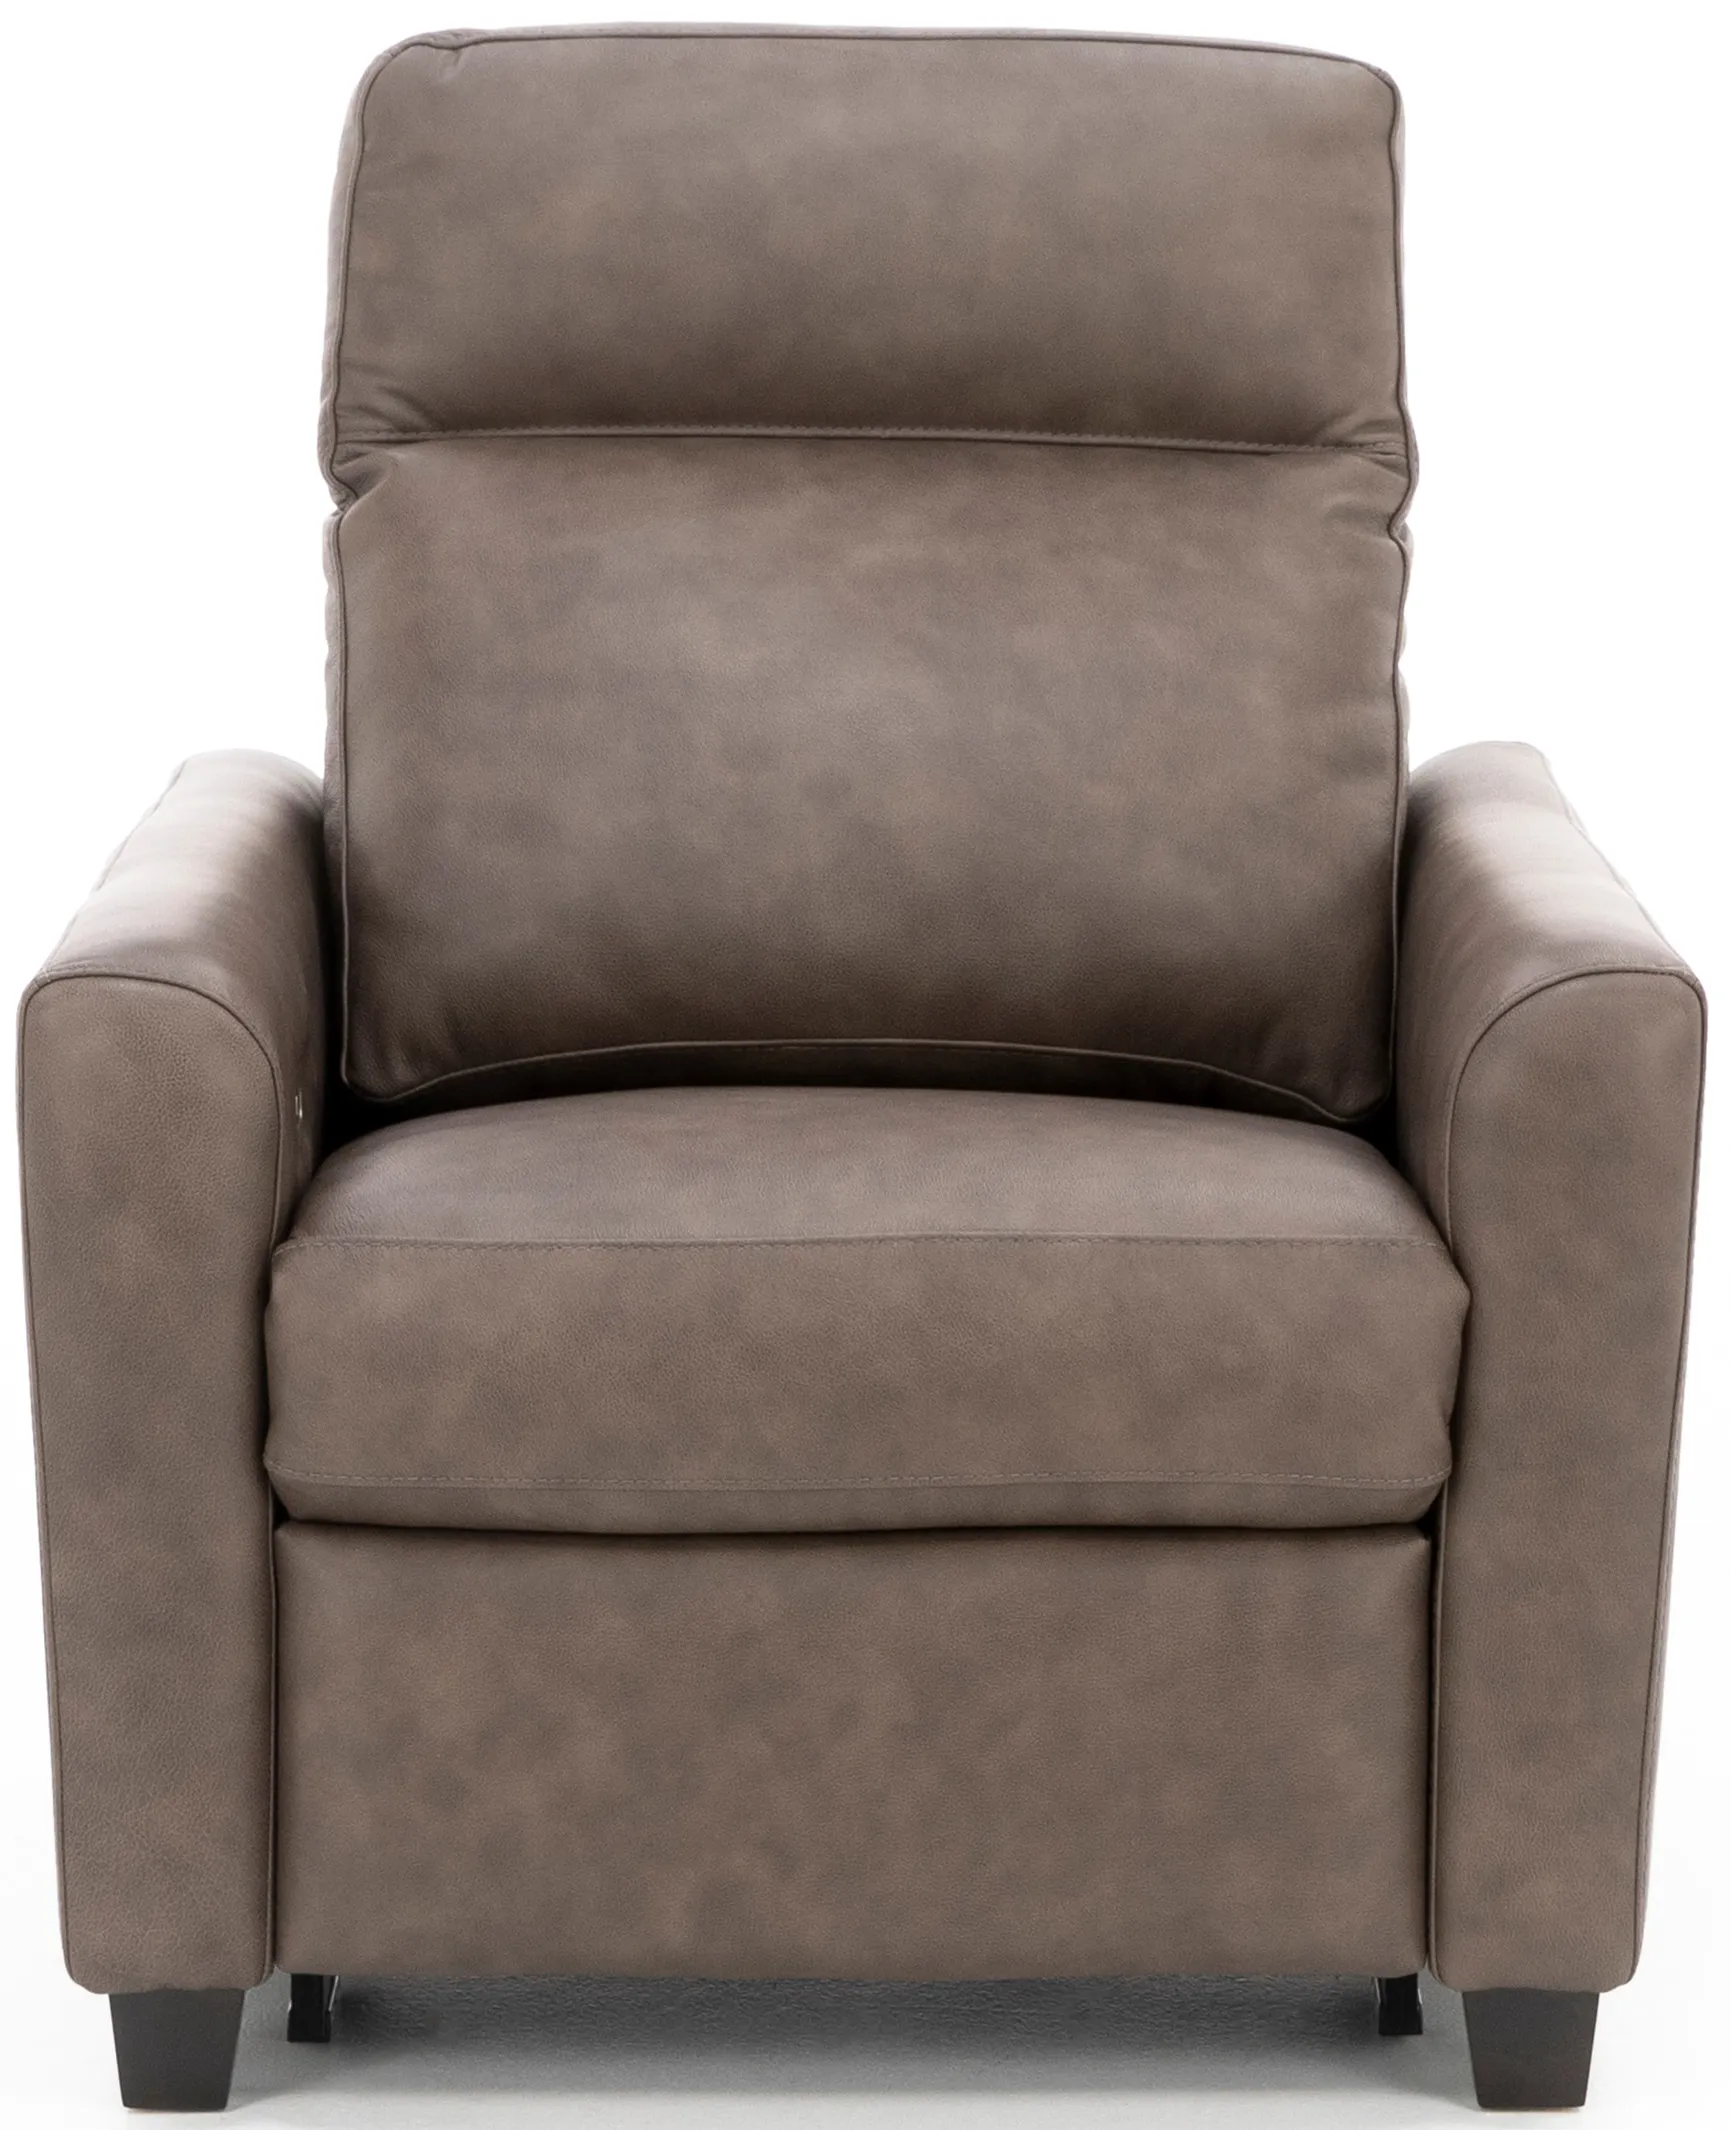 Pasadena Leather Dome Arm Power Headrest Recliner in Driftwood